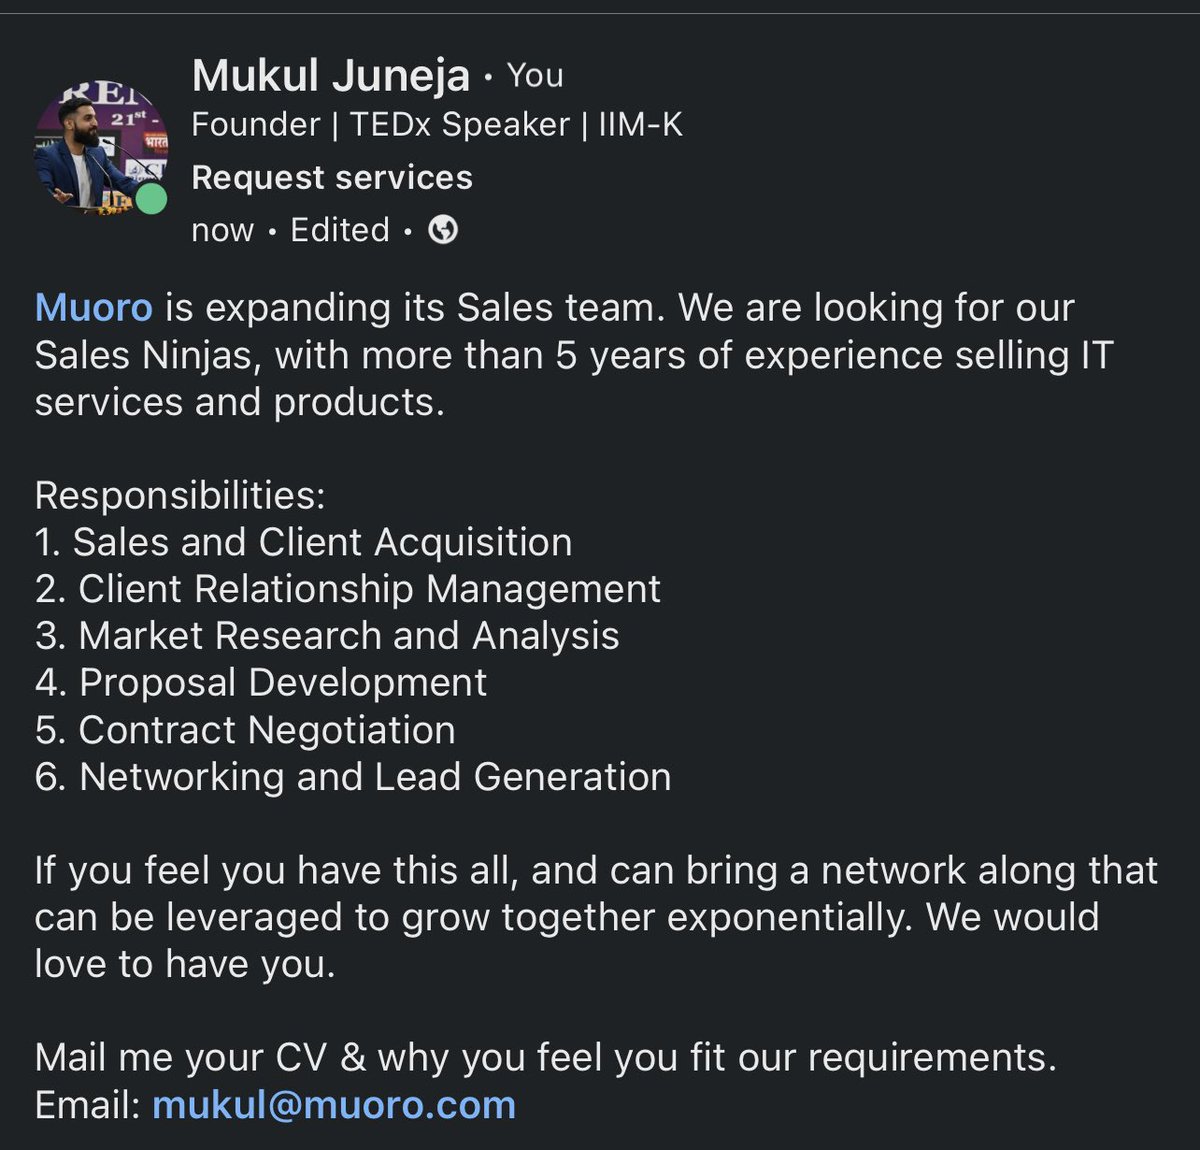 #Hiring for #salesExpert. We are looking for someone with prior experience in IT industry and can bring a network along.

#jobAlert #sales #salesjob